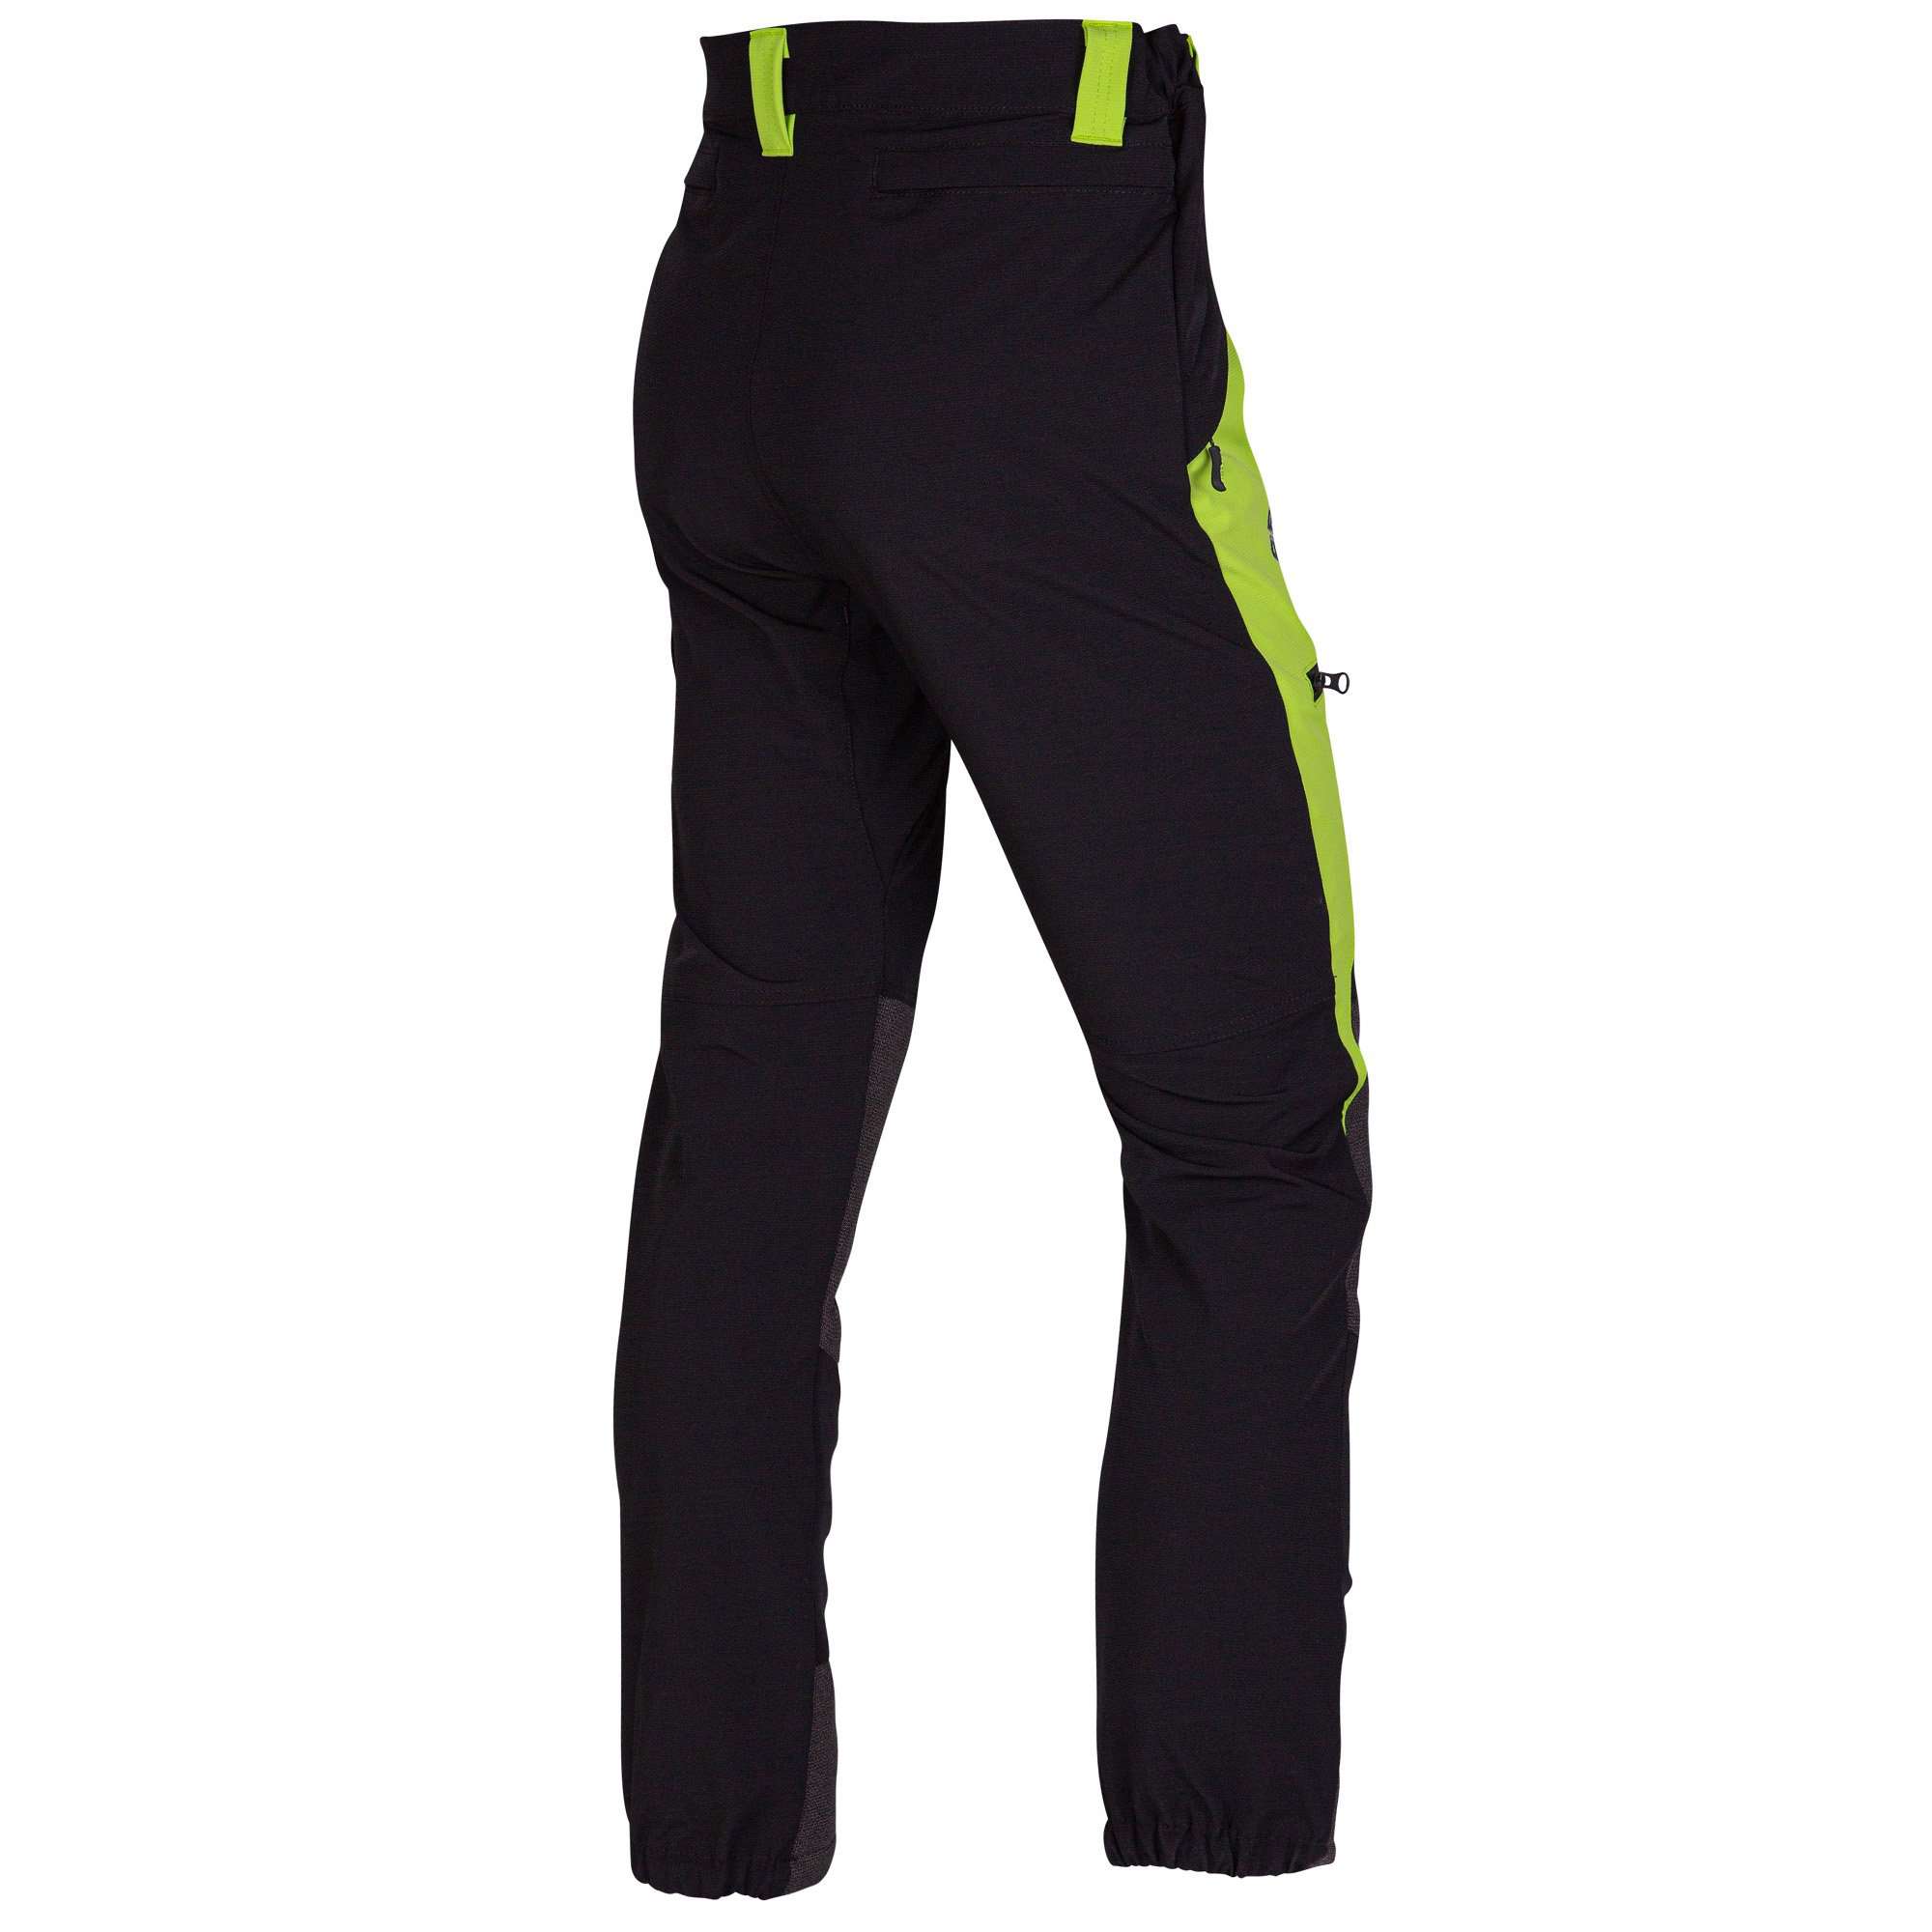 AT4110 Breatheflex Non-Protective Trousers - Lime - Arbortec Forestwear